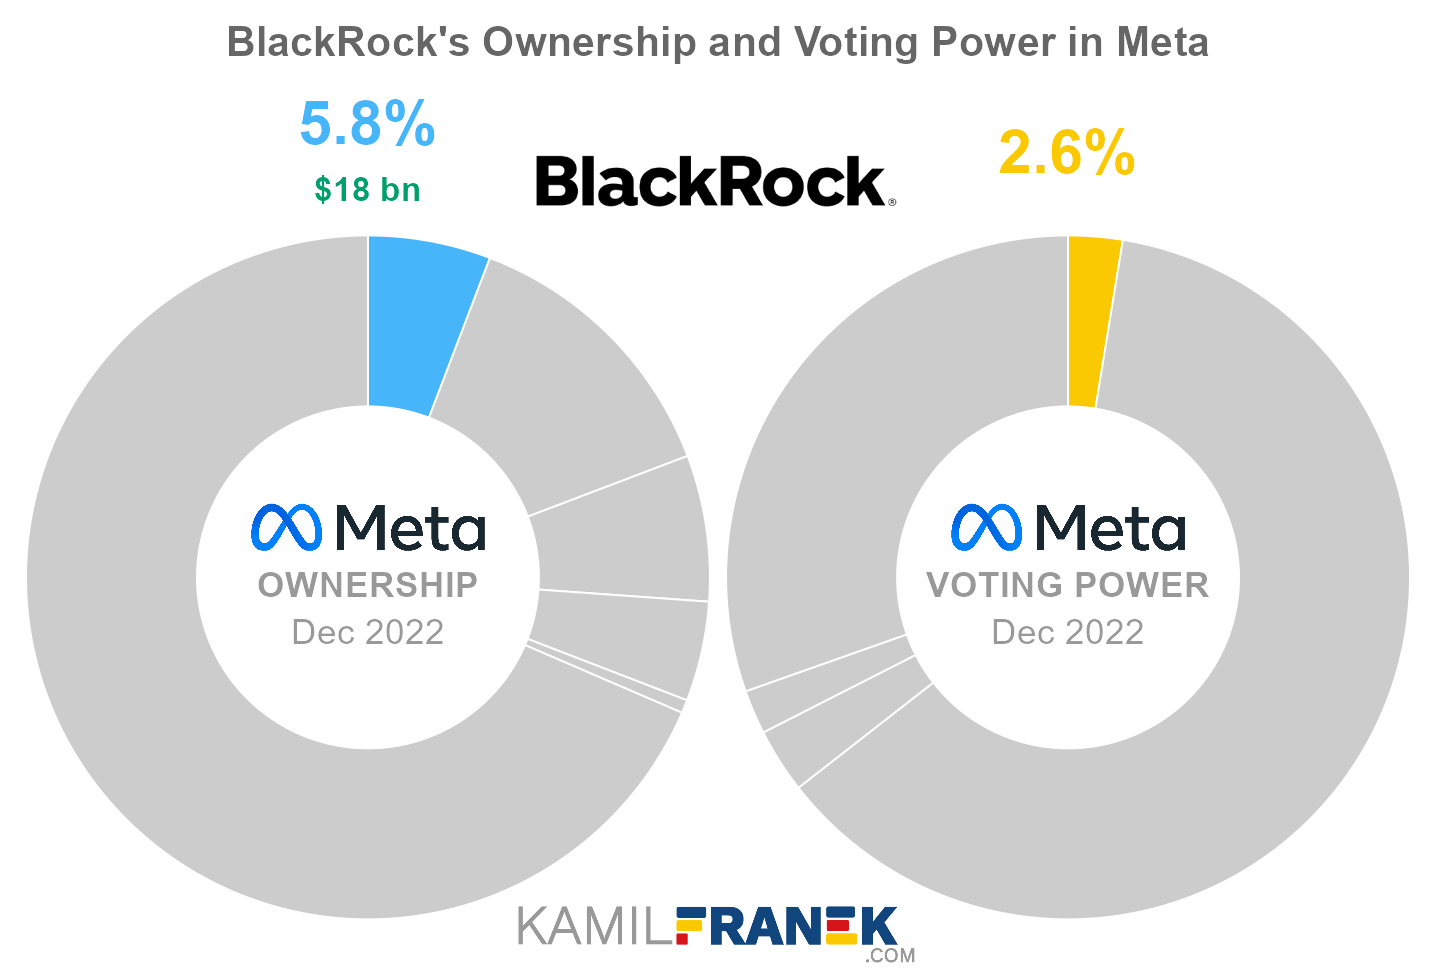 BlackRock's share ownership and voting power in Meta (chart)